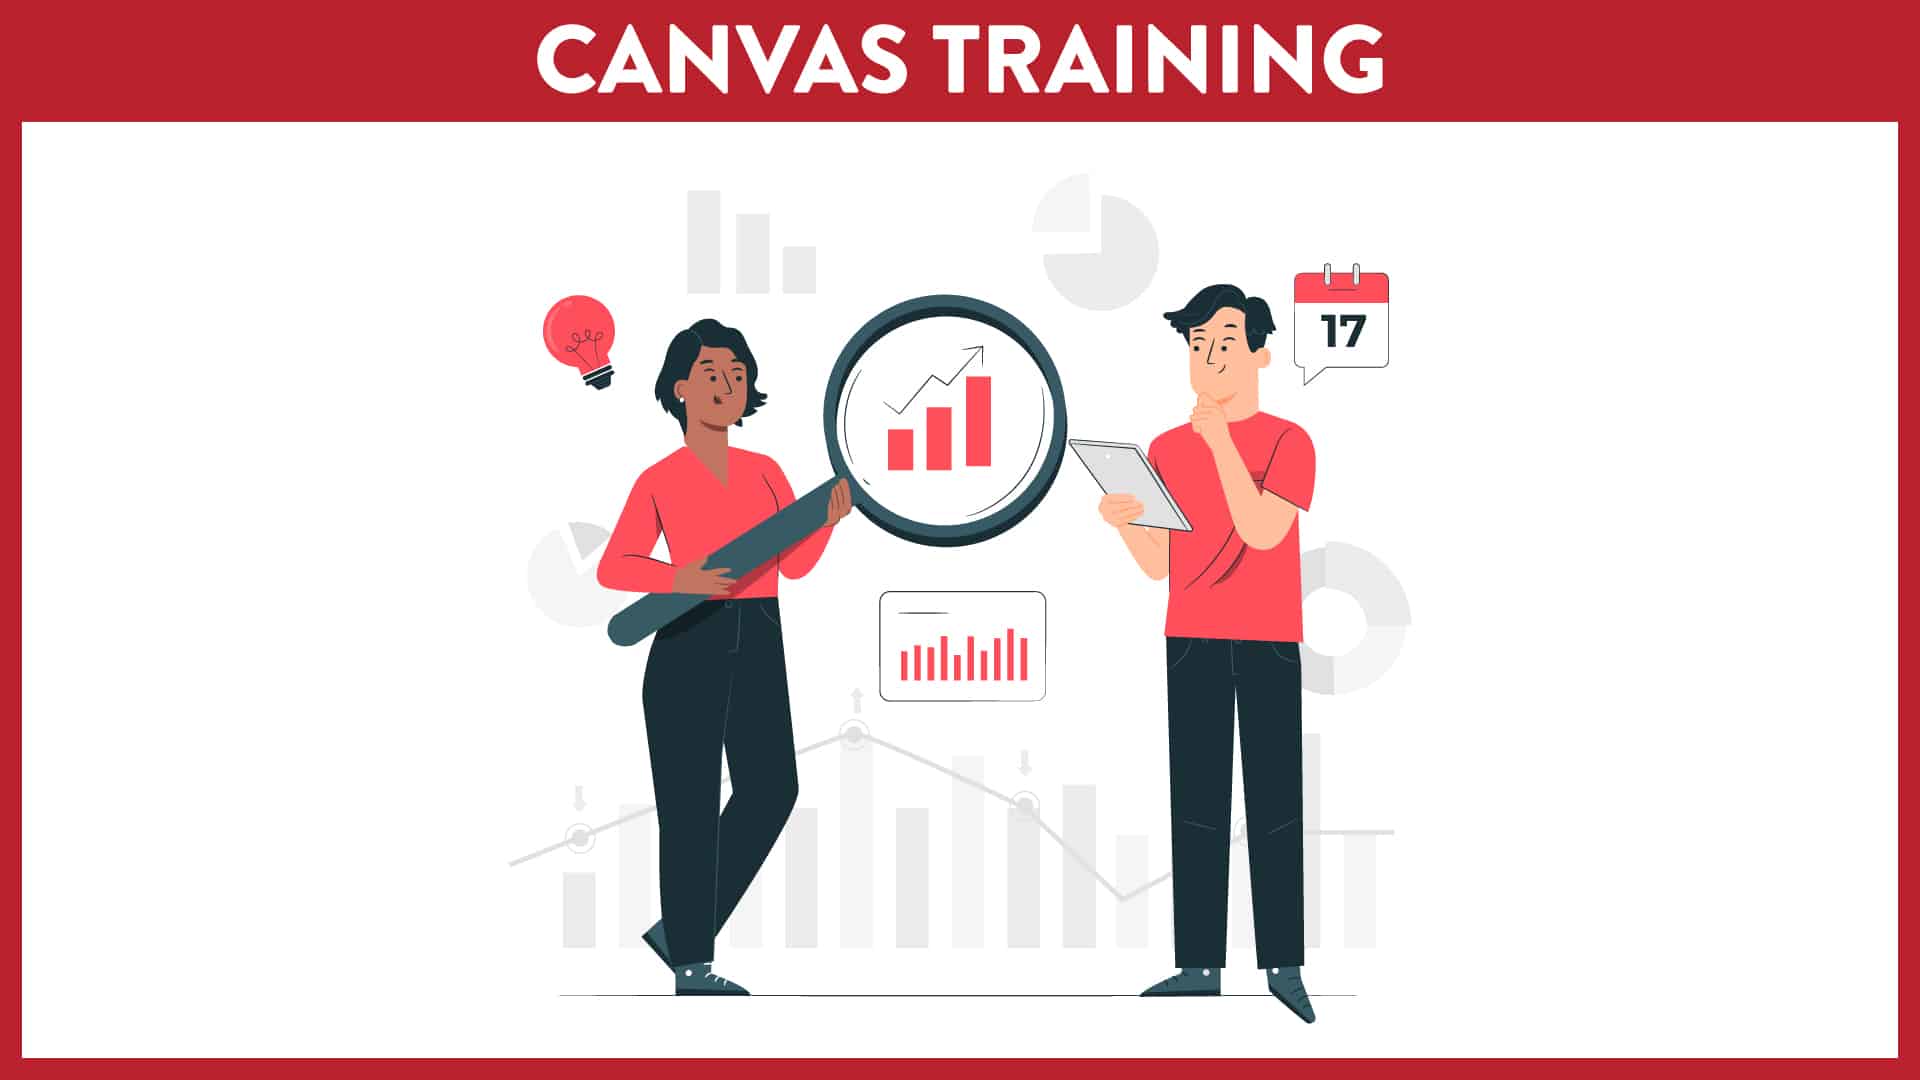 Canvas Training Event Cover Image Illustration